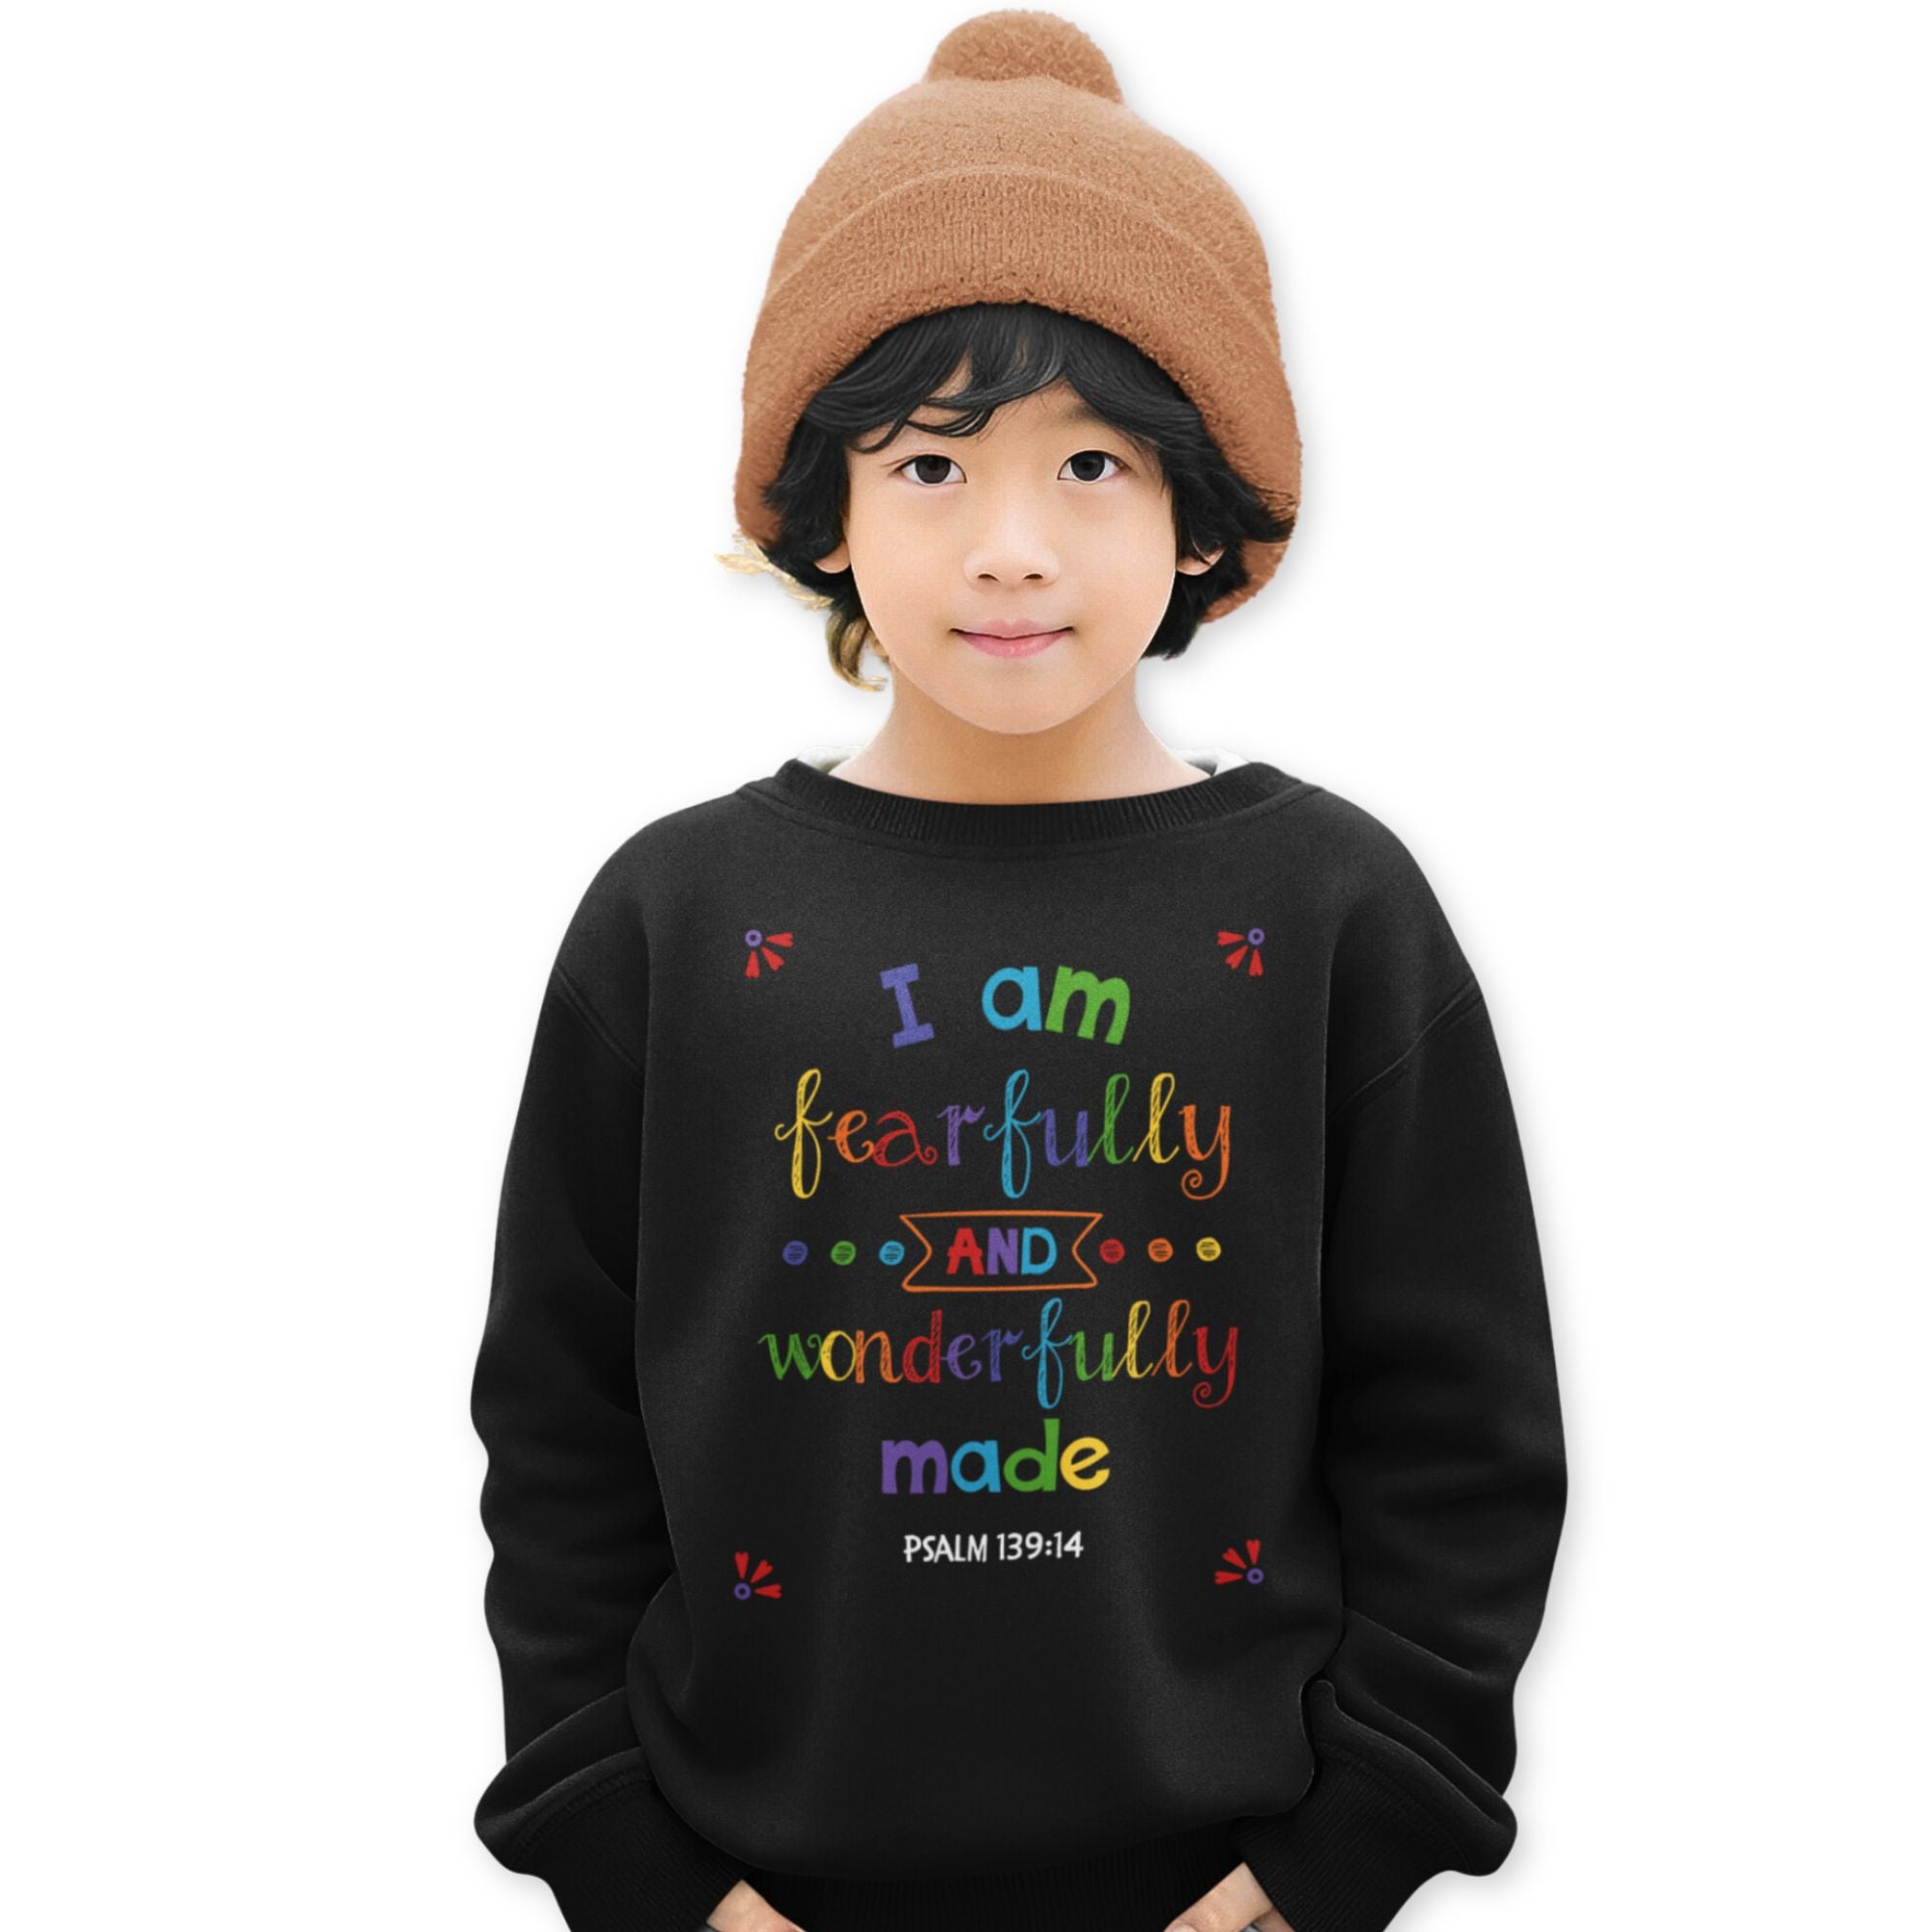 I am Fearfully Wonderfully Made Youth Crewneck Sweatshirt Color: Black Size: XS Jesus Passion Apparel